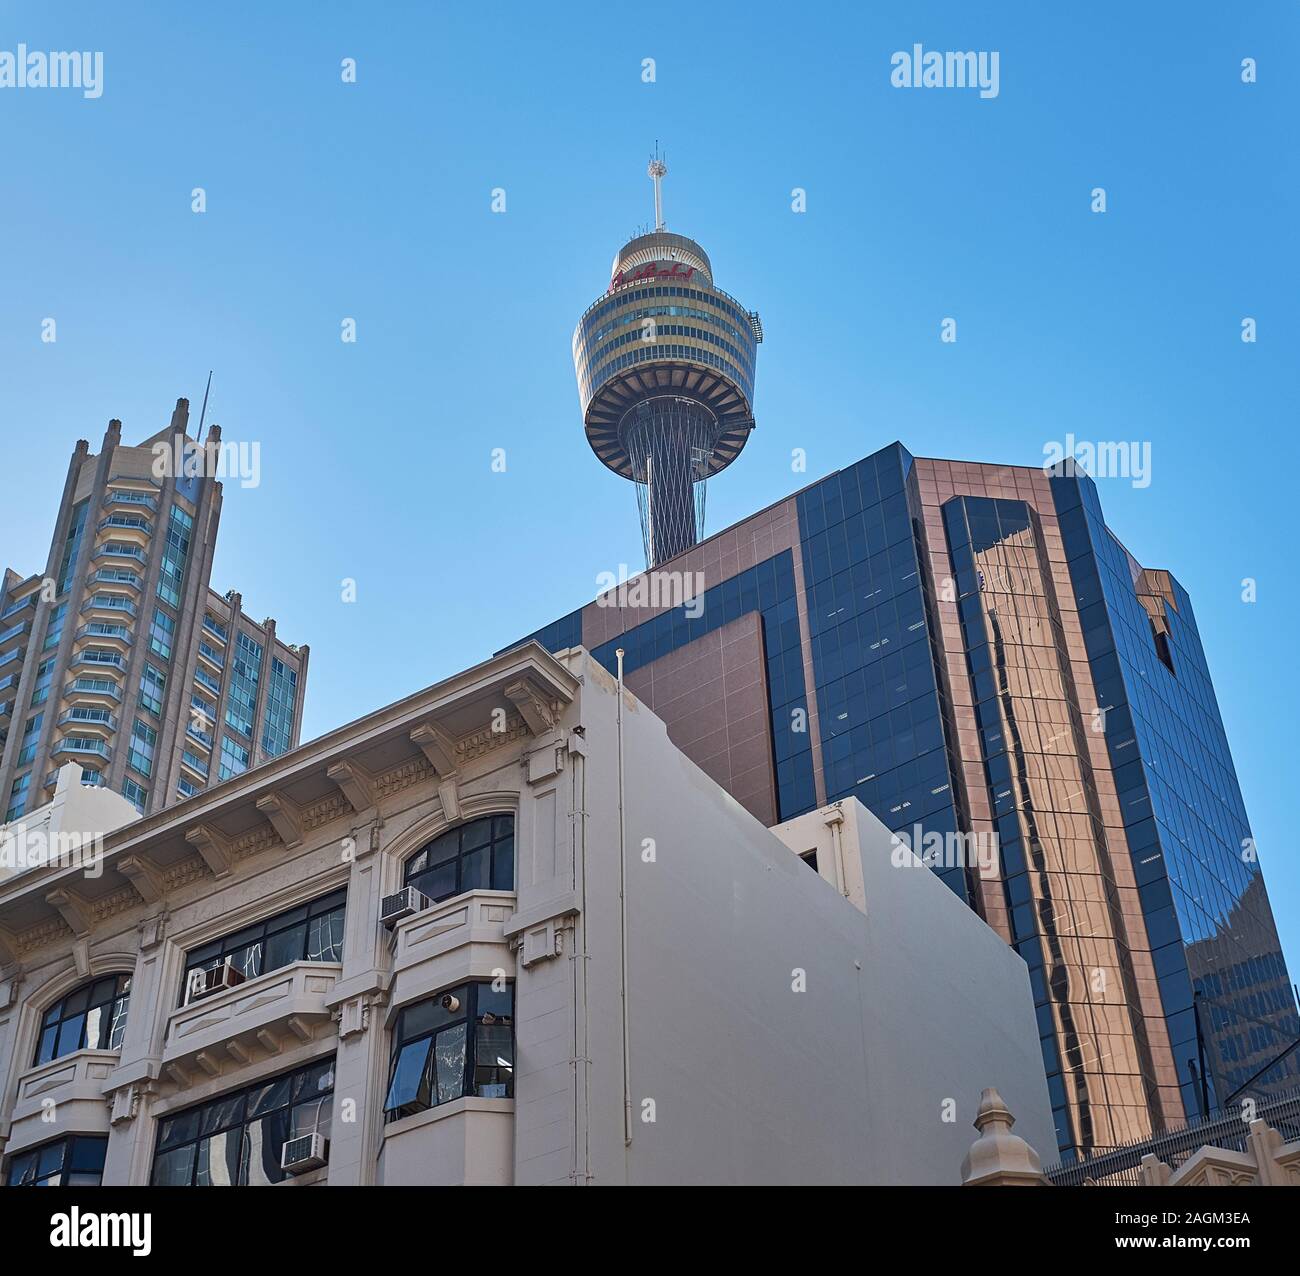 Looking up towards the sky from a street in the Sydney Central Business District with the Sydney Tower rising above the buildings that surrounds it Stock Photo